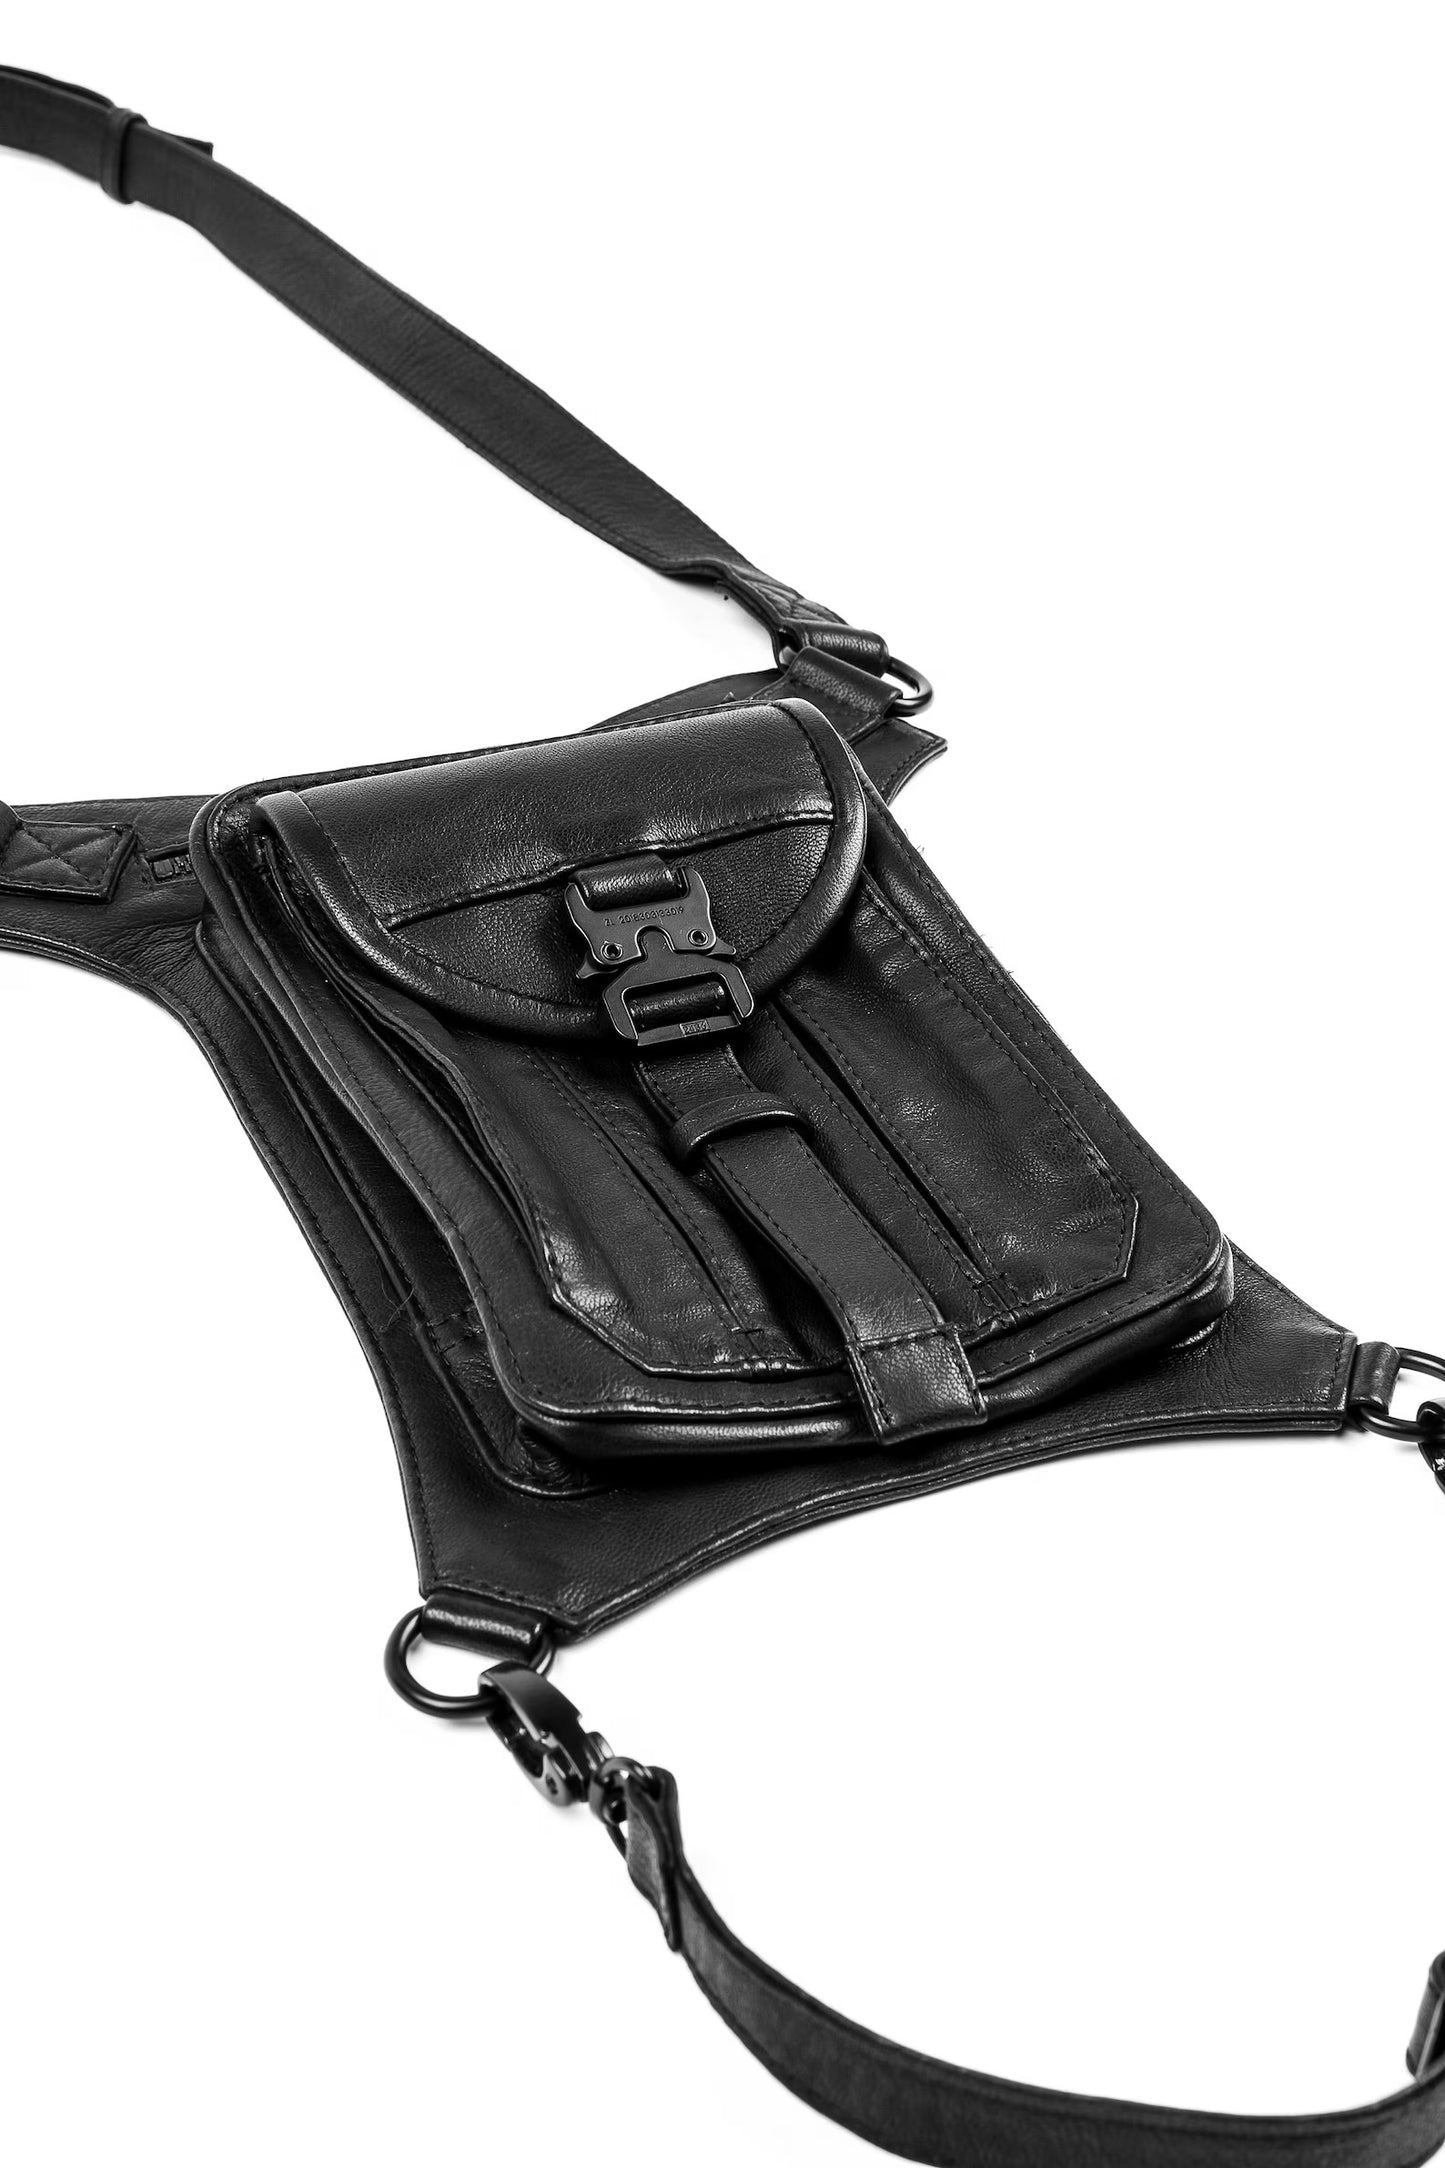 Tactical Edge Black Leather Holster and Hip Bag